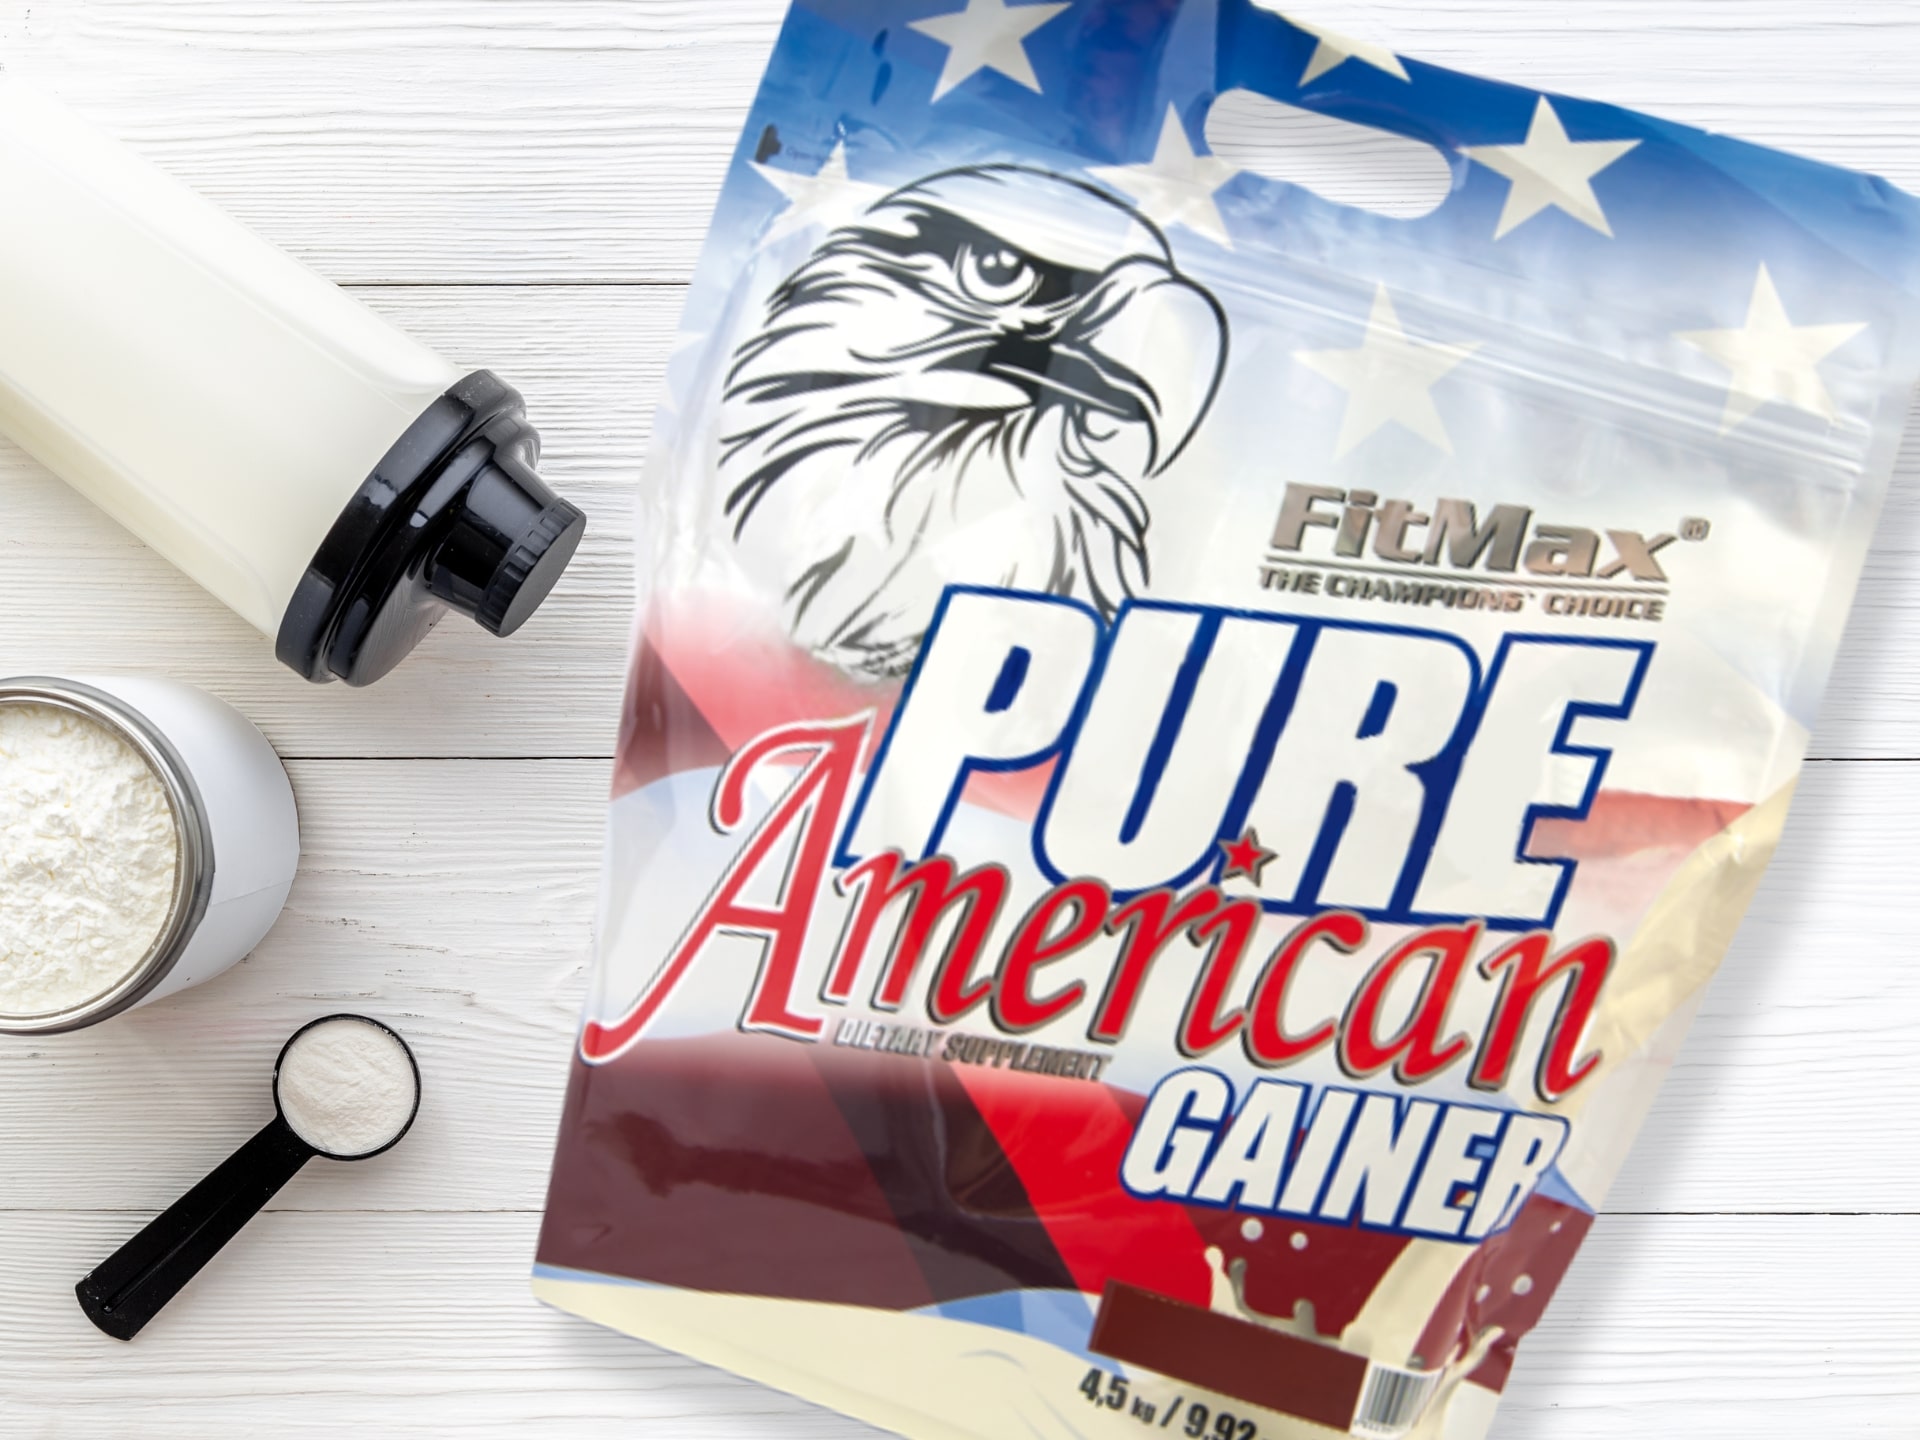 FitMax - Pure American Gainer - Chocolate